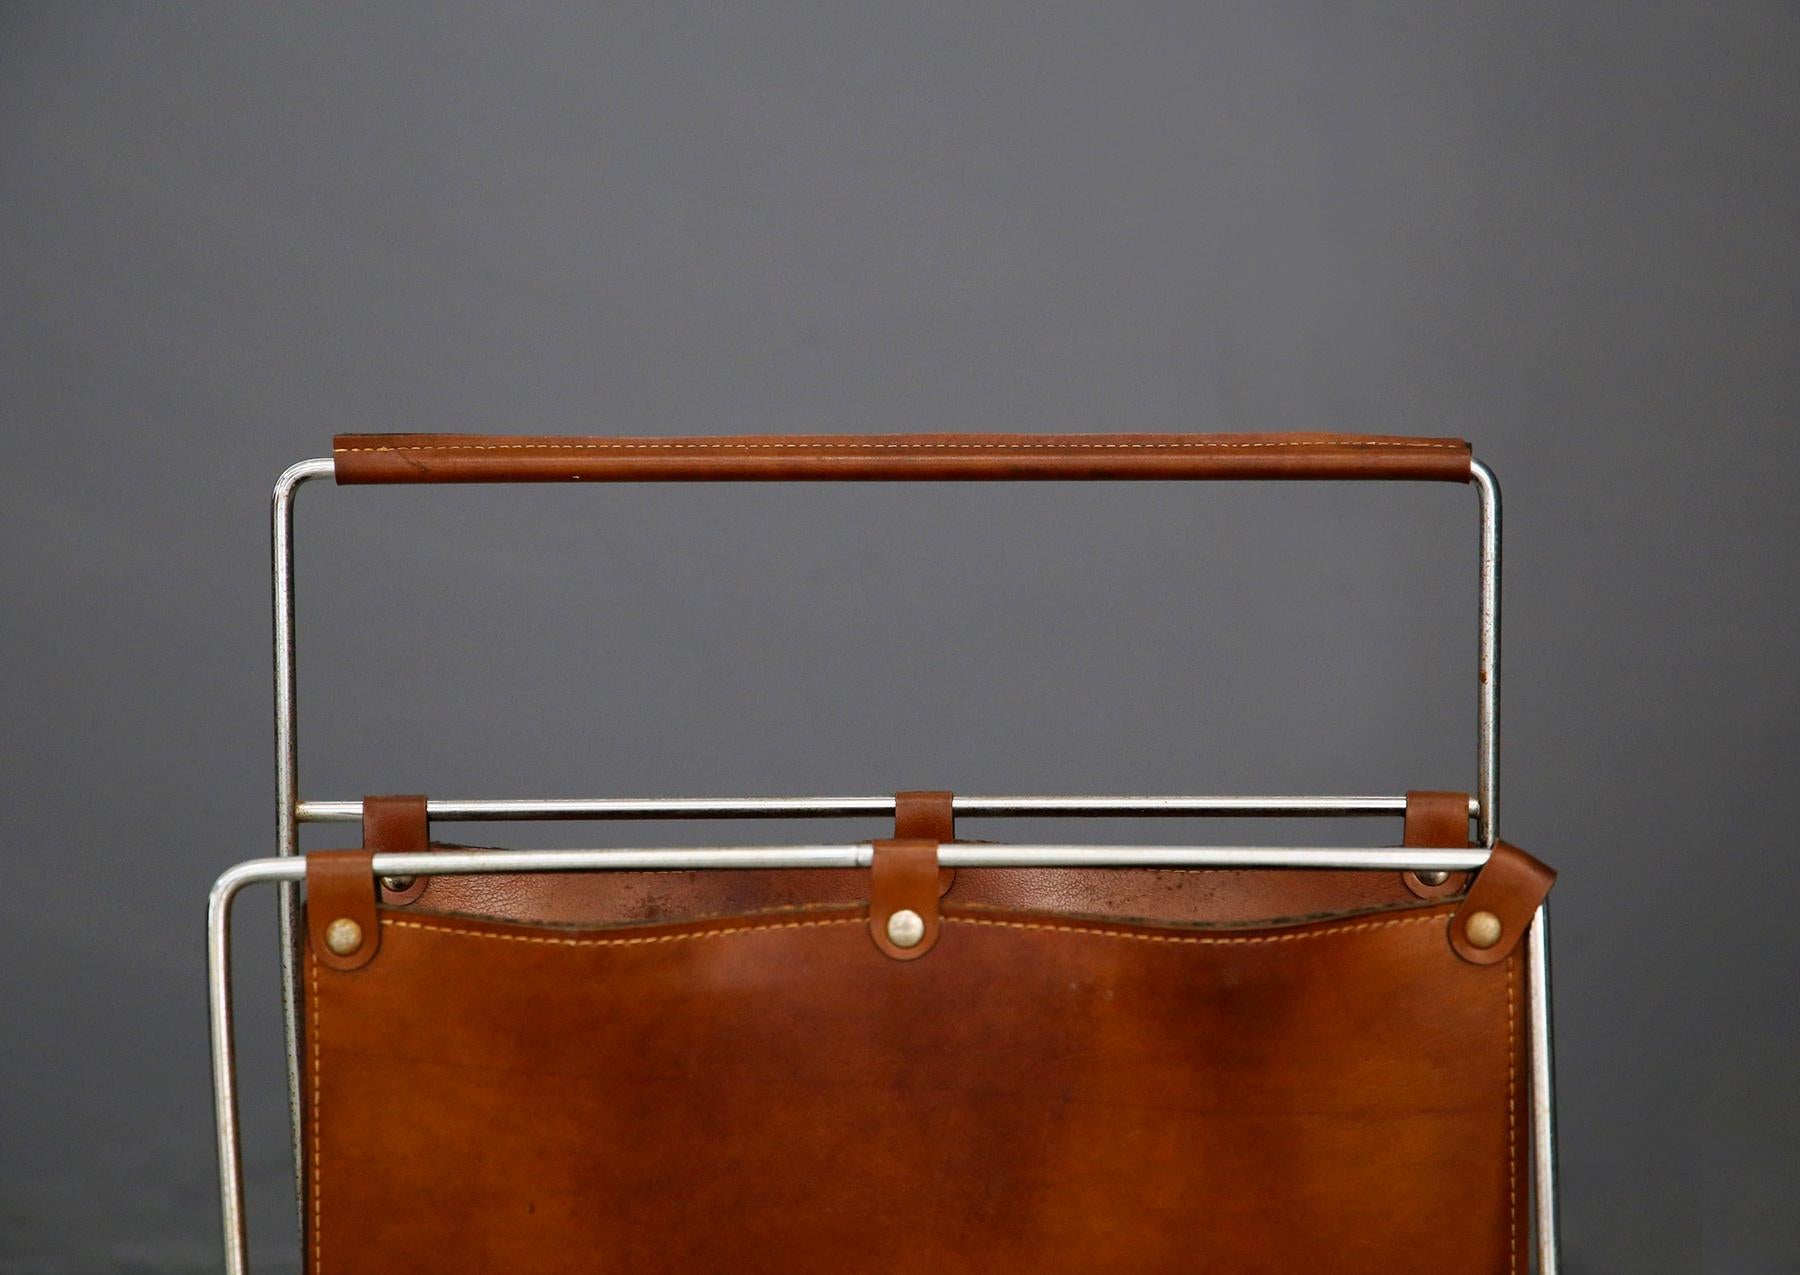 Elegant period magazine rack, Vienna, circa 1950.
Its cladding and handle are made of brown leather with lighter-colored stitching to make them stand out. The frame of the structure is made of nickel-plated steel and covered with a uniform natural